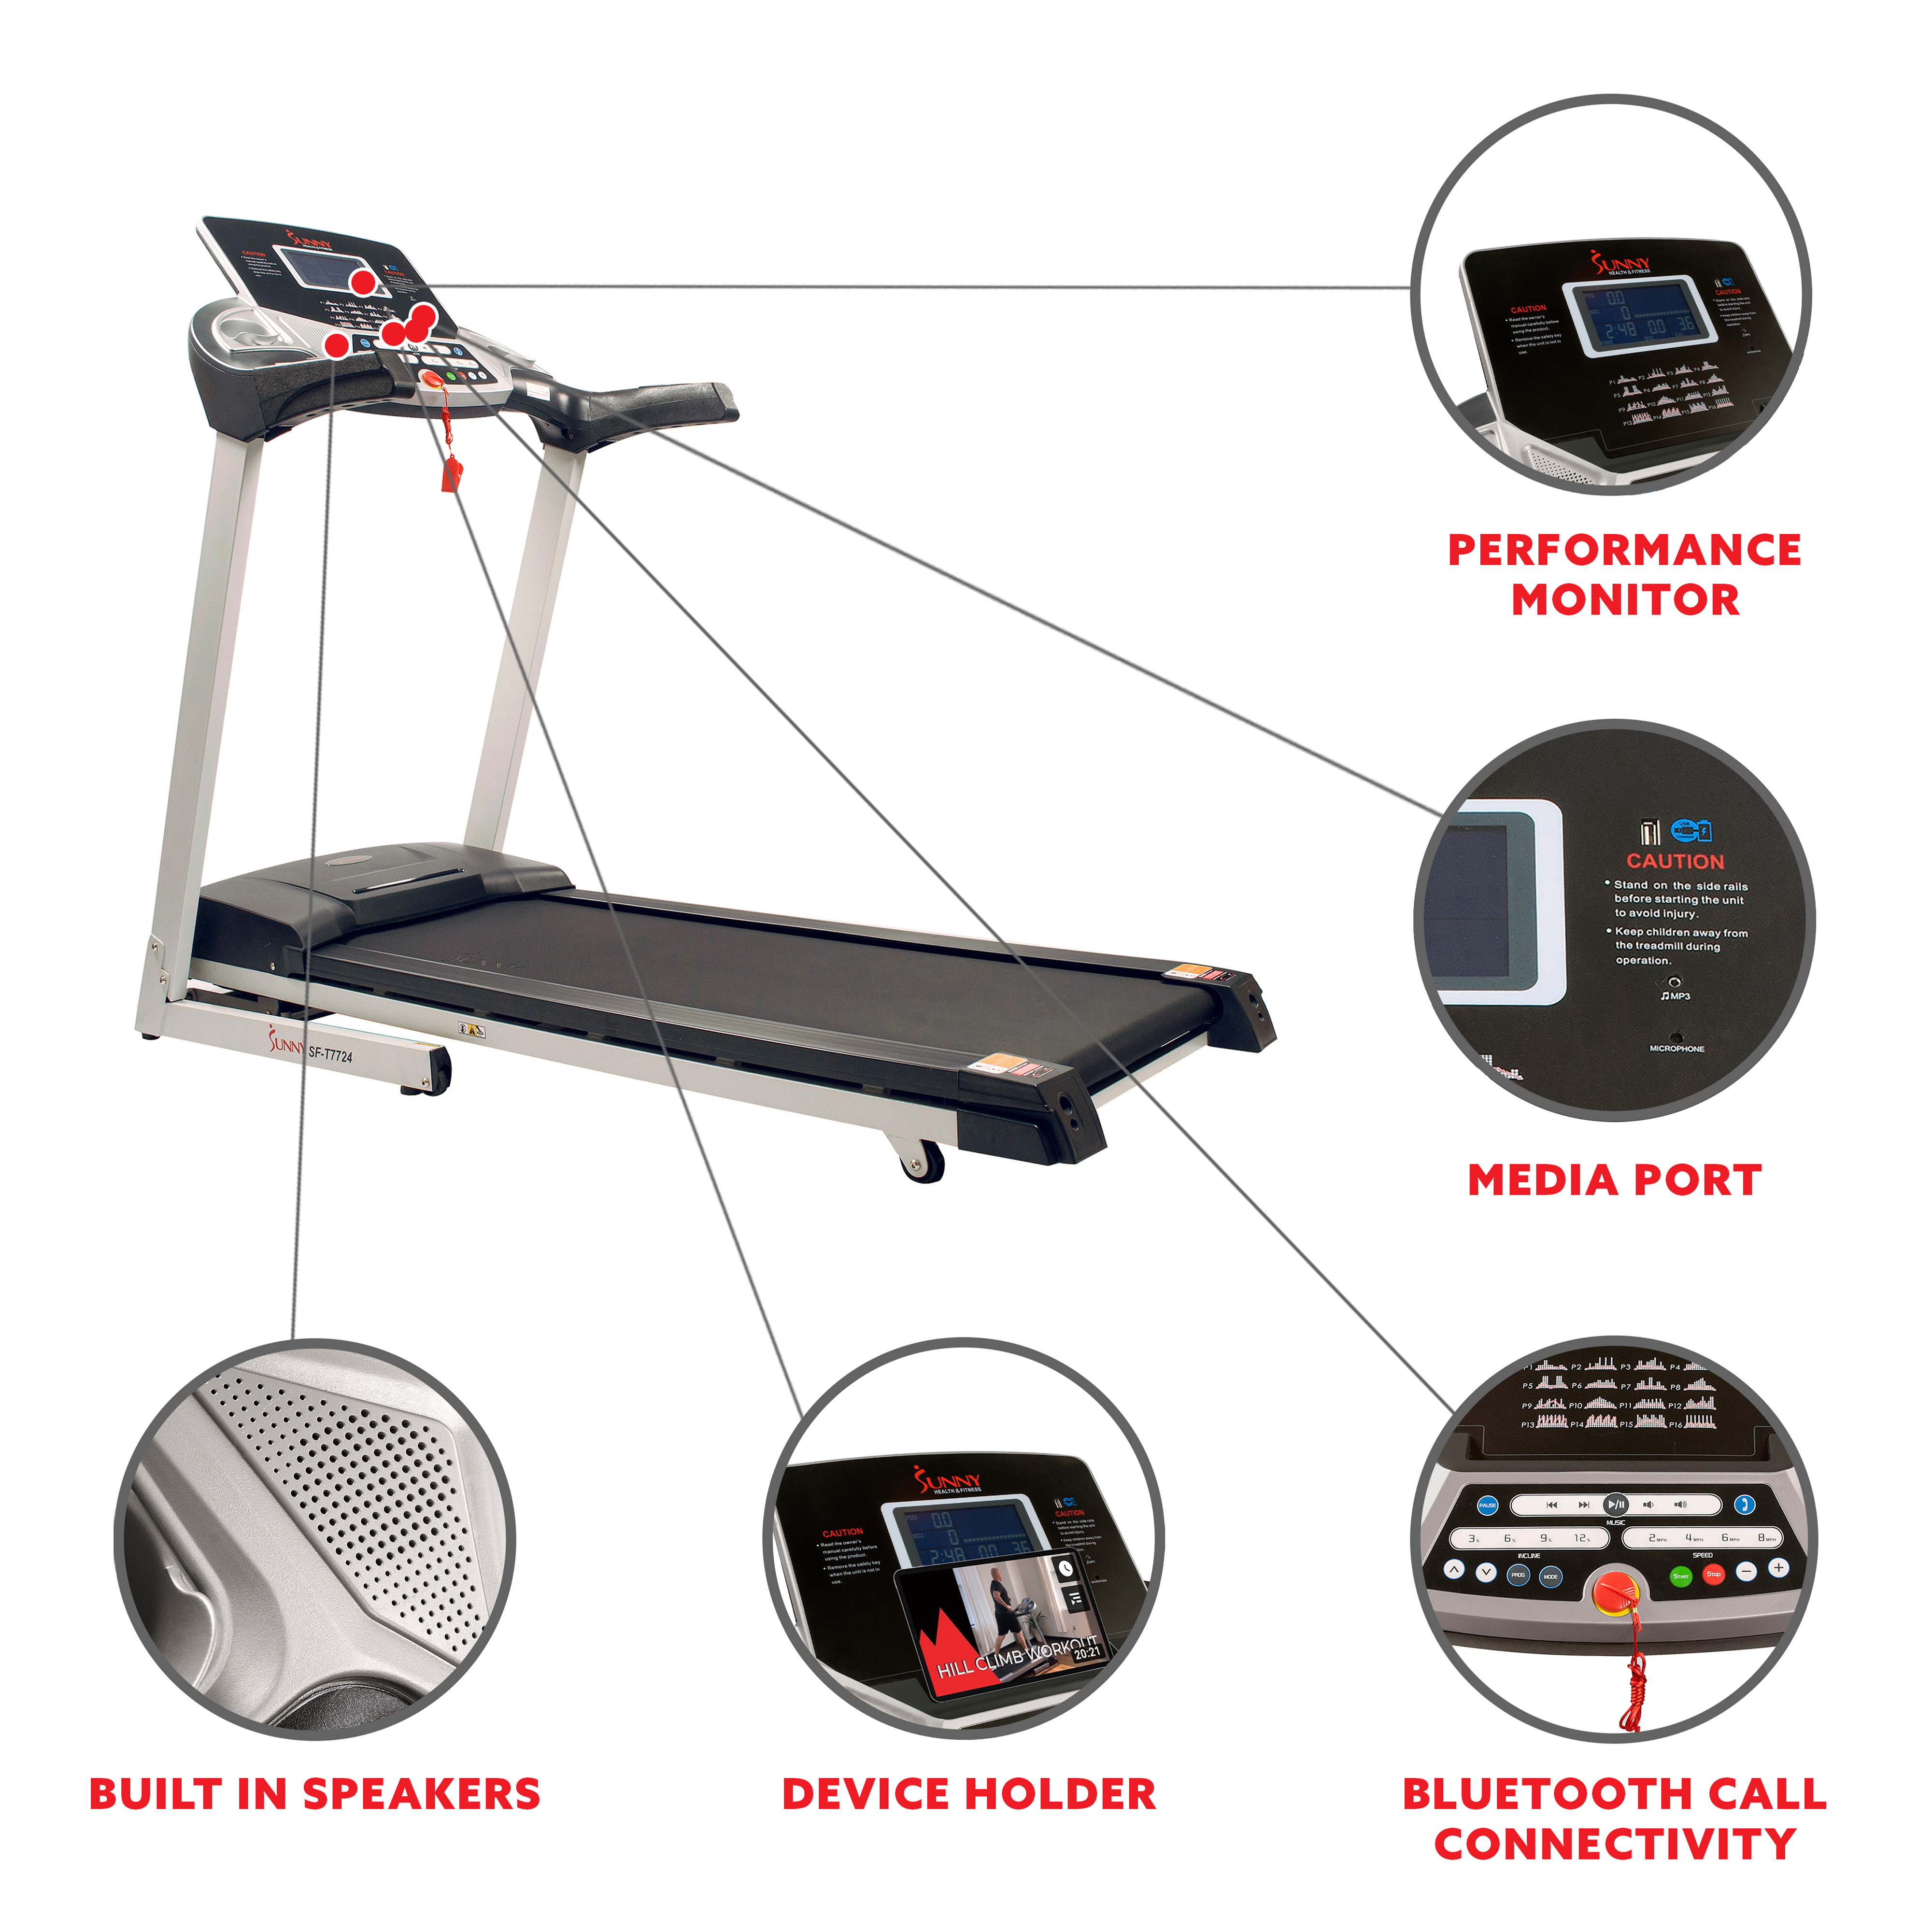 Sunny Health & Fitness Energy Motorized Incline Treadmill, Portable Folding Home Exercise Machine, Walking, Running, SF-T7724 - image 3 of 11